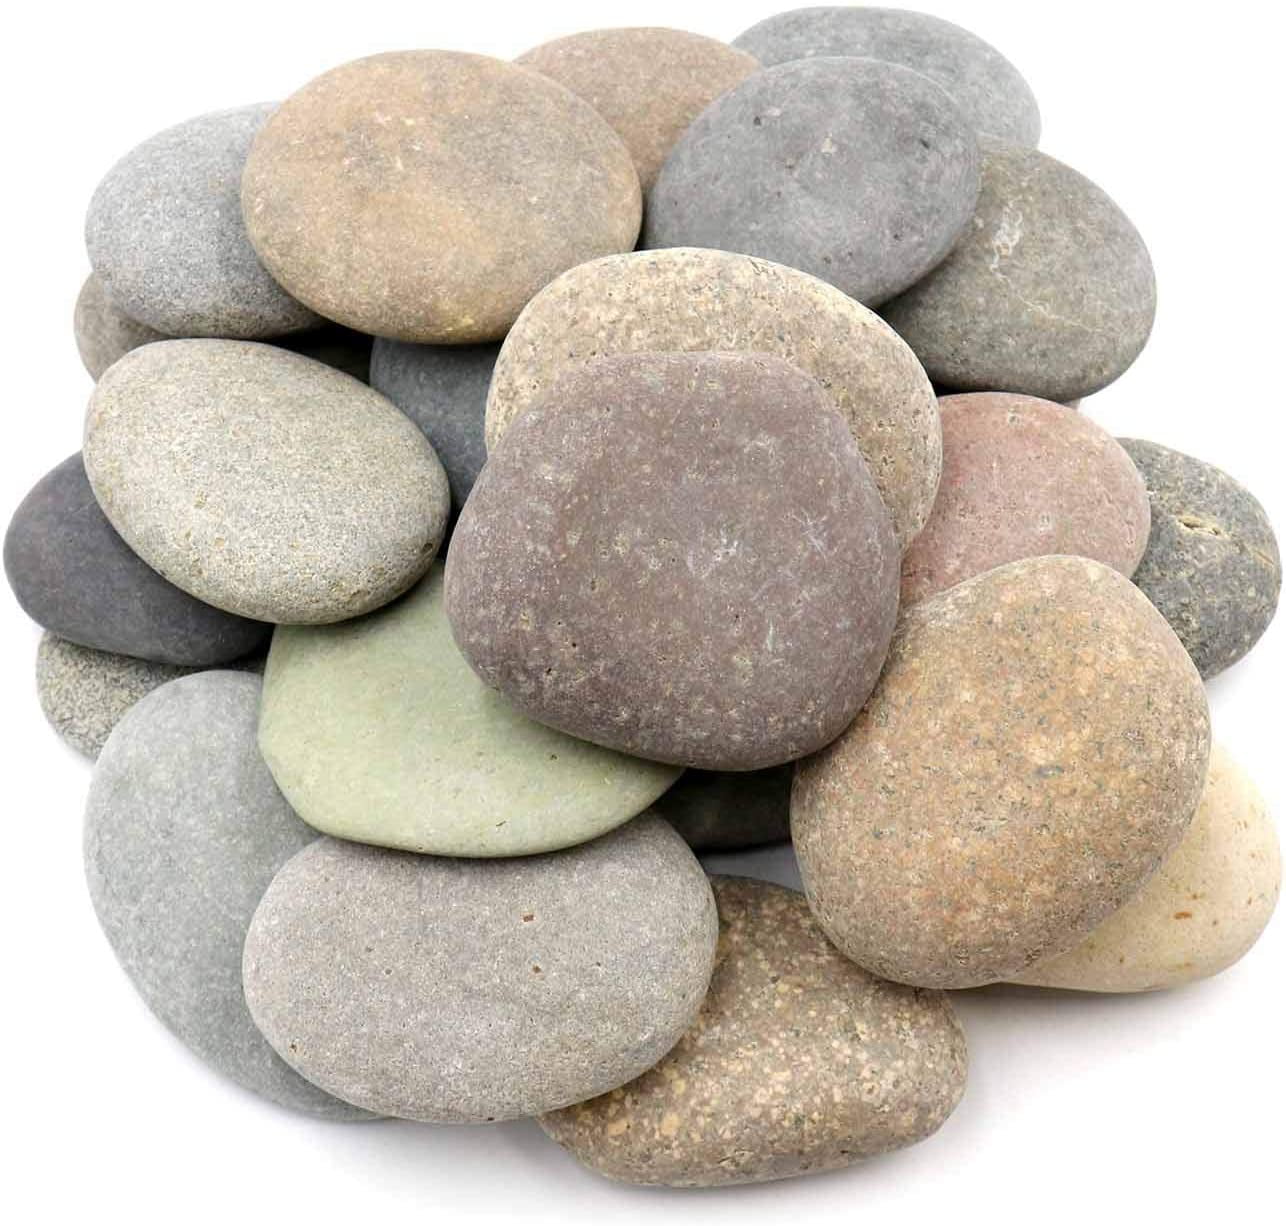 Koltose by Mash - Craft Rocks for Painting, 100% Natural Flat River Stones,  Extra-Large 3.5” - 5” inch, Set of 20